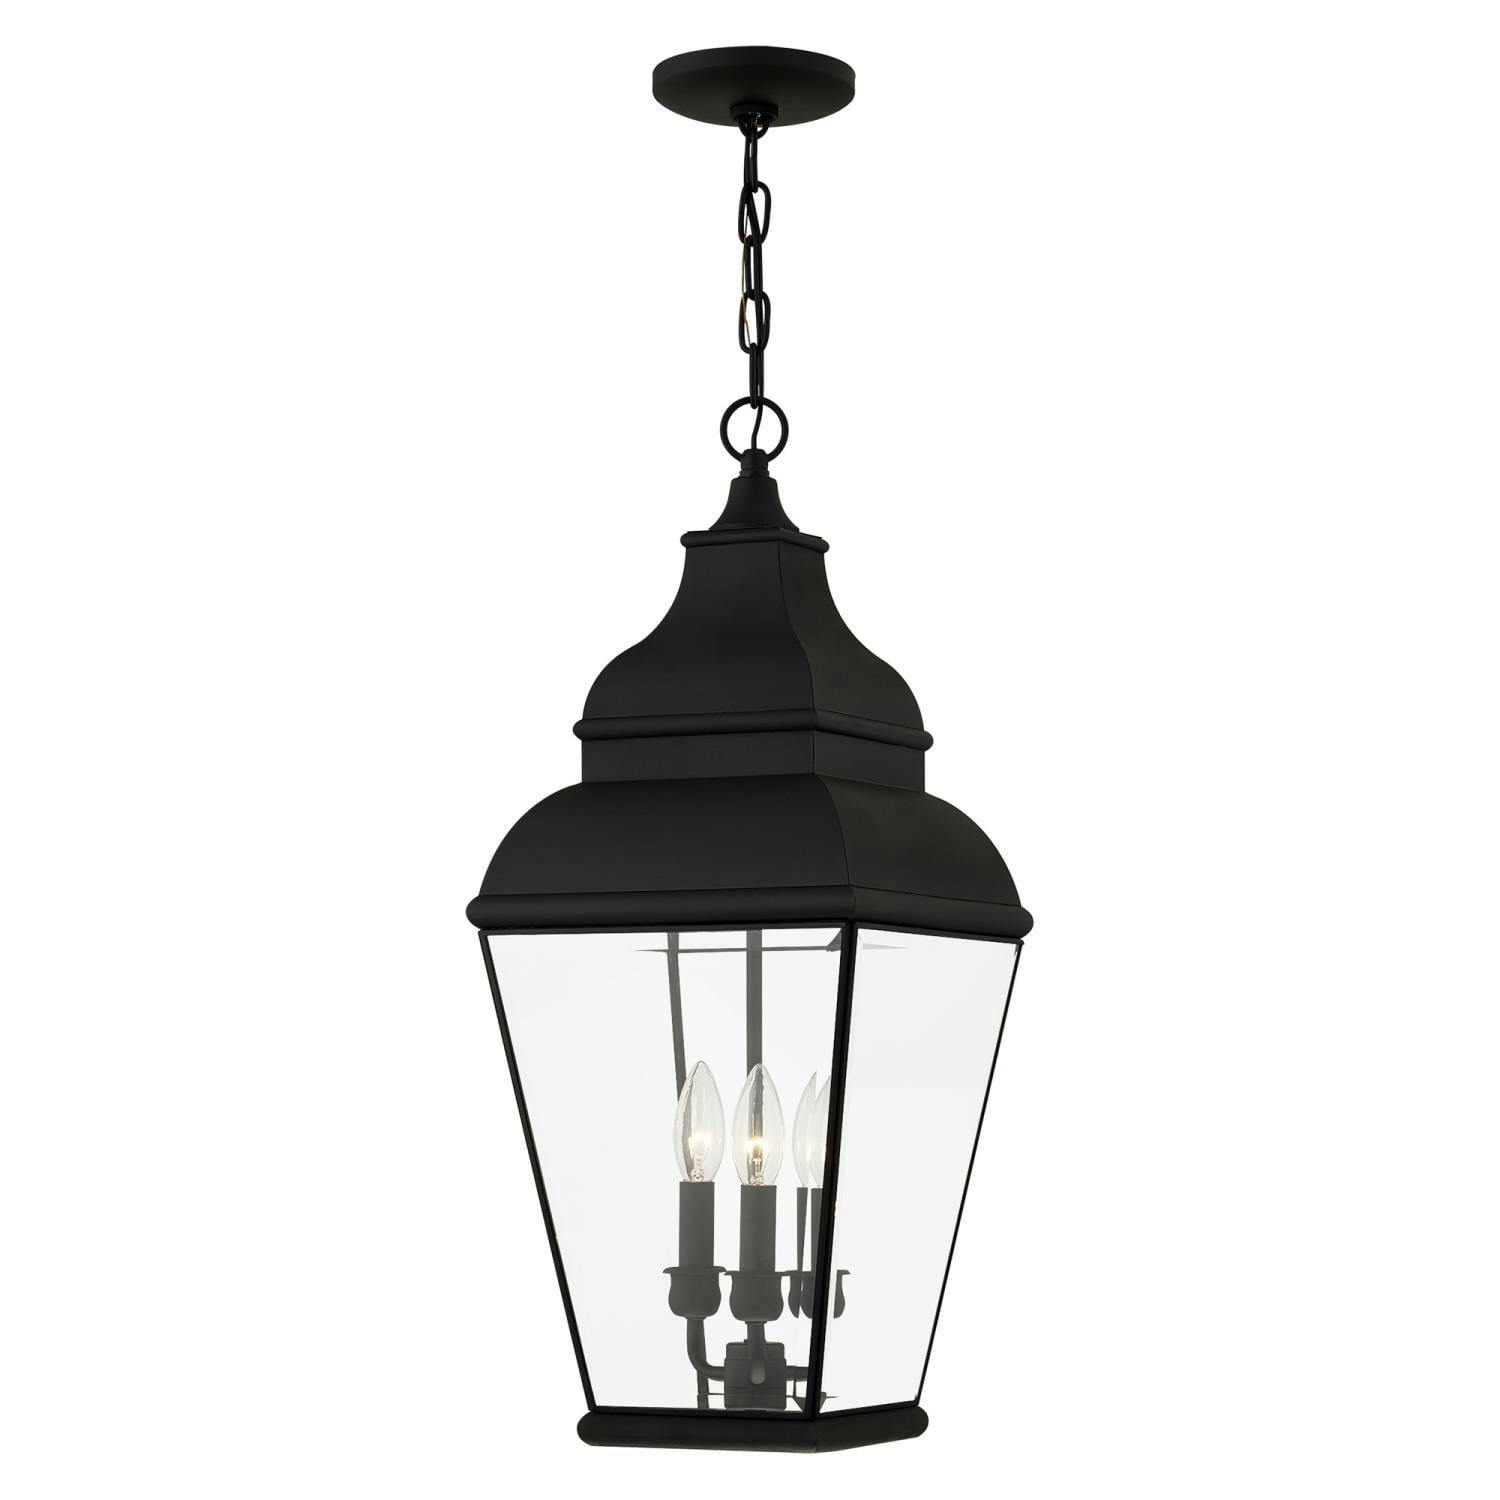 Exeter 3-Light Black Nickel Outdoor Pendant Lantern with Clear Beveled Glass